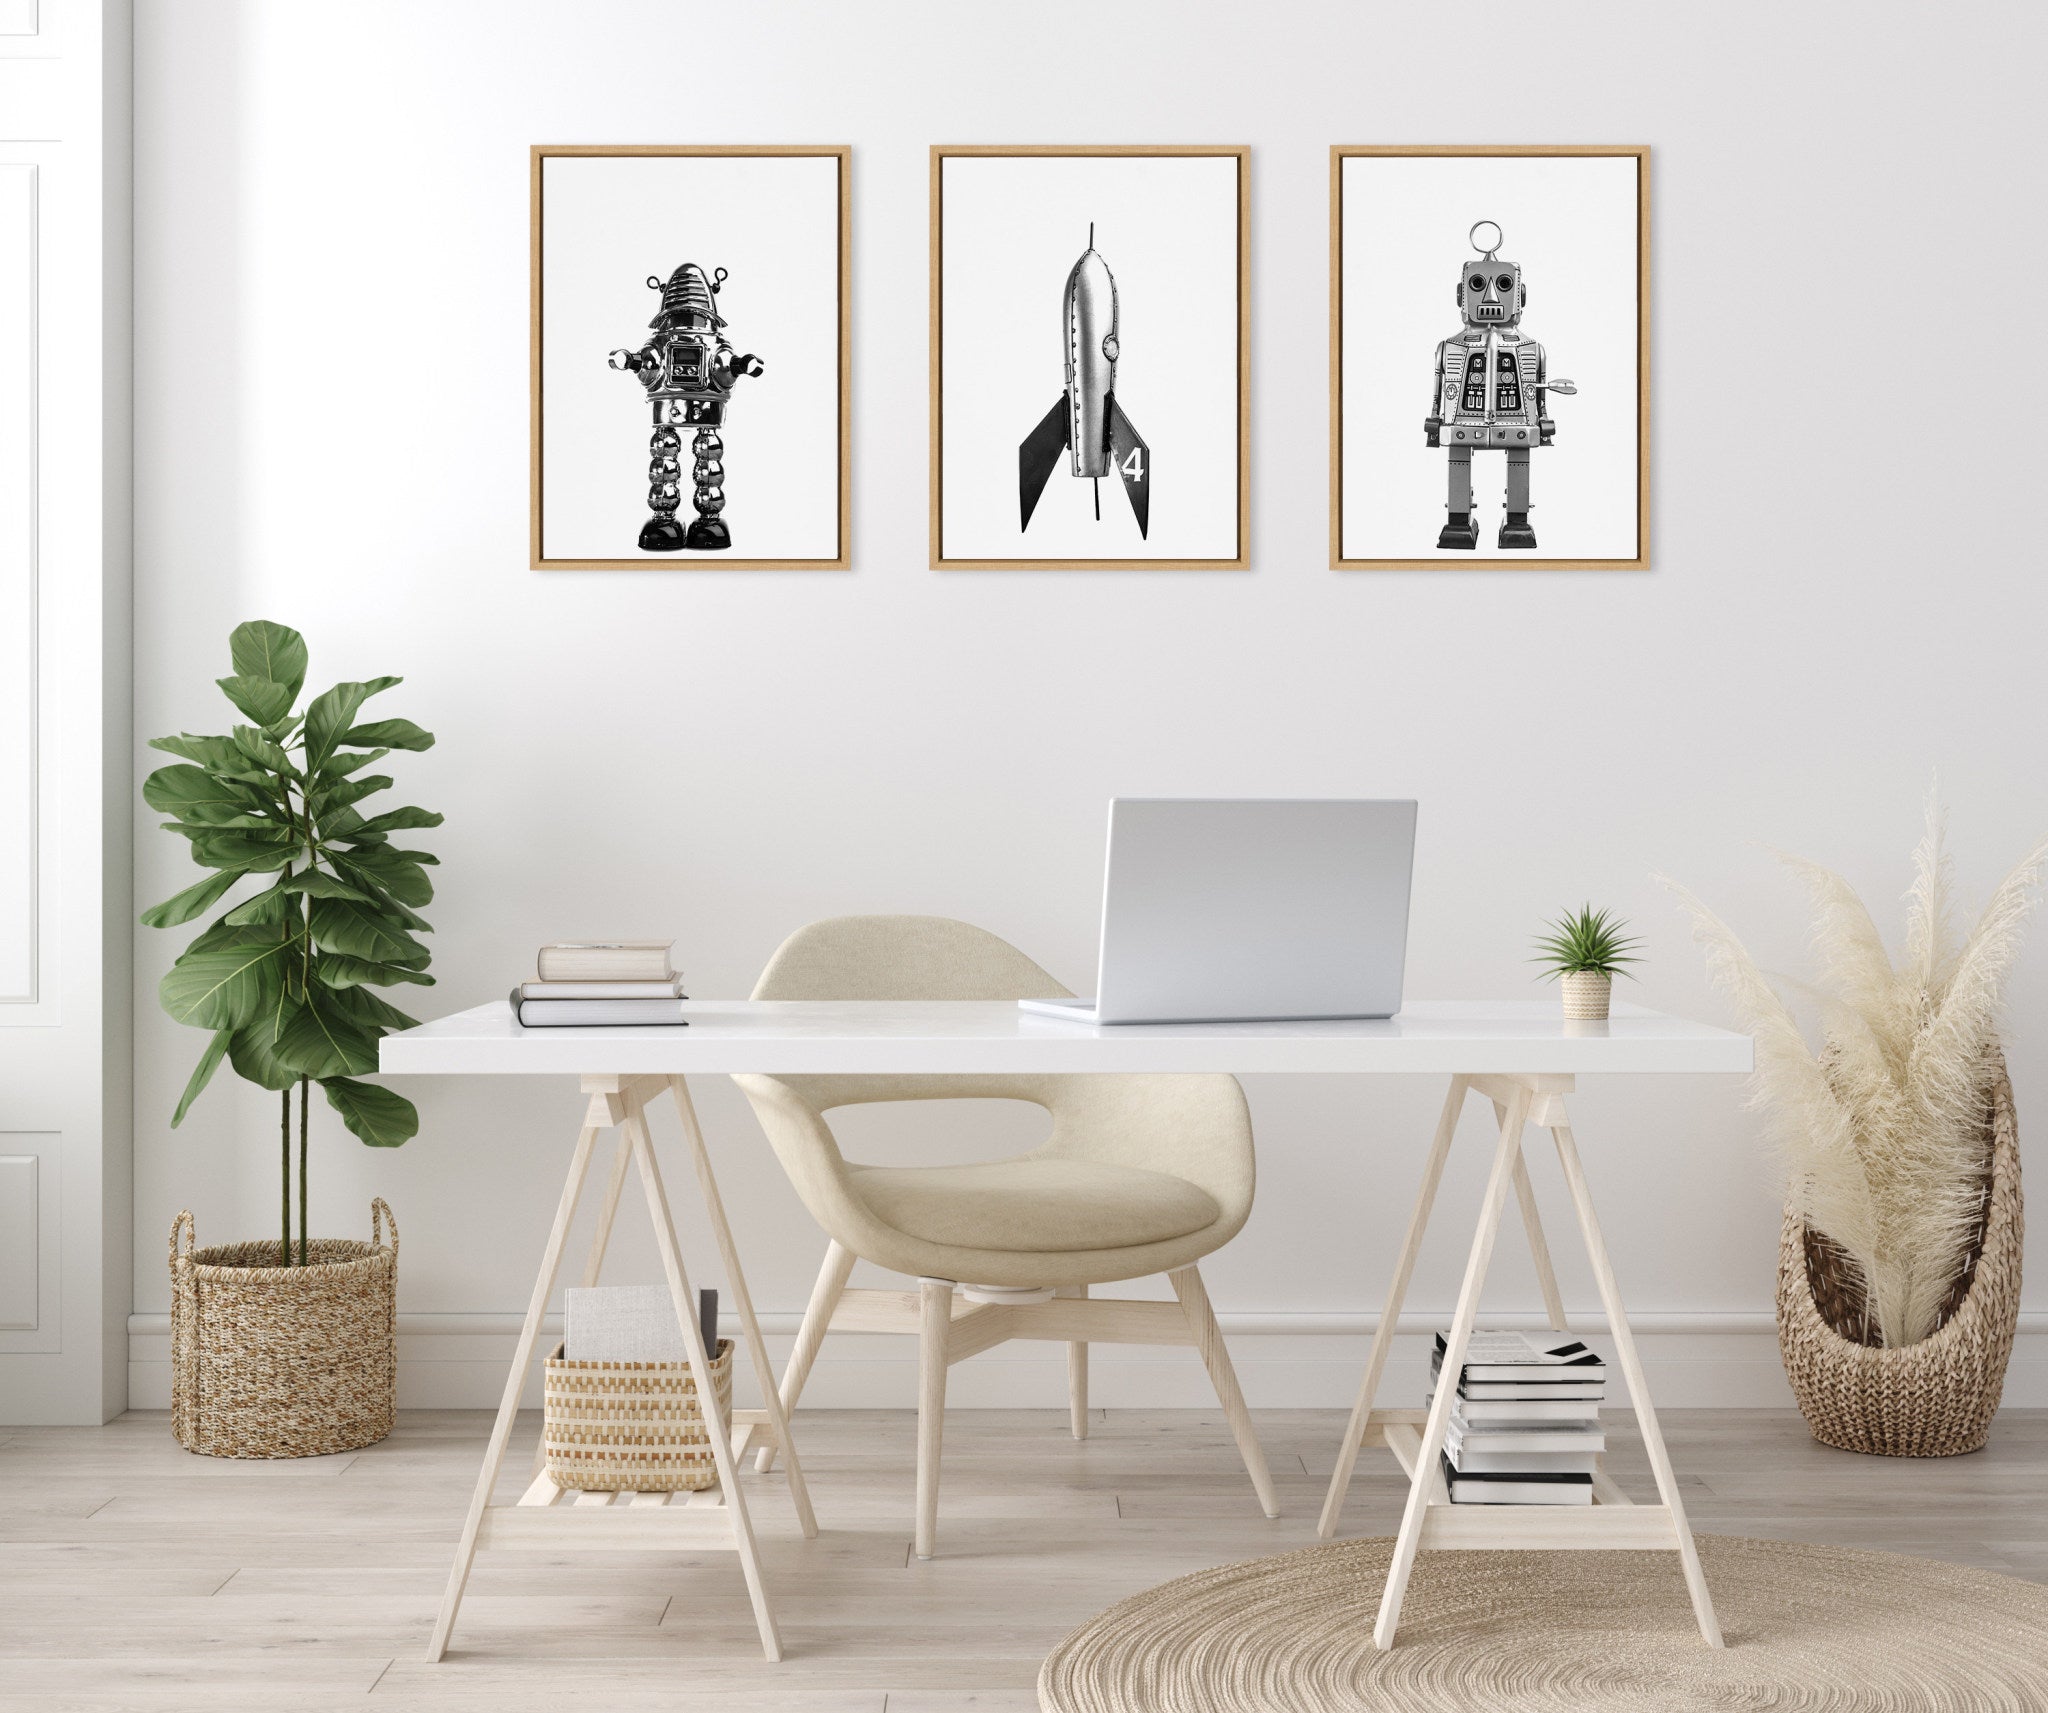 Sylvie Sparky Space Robot, No 4 Rocket and Robbey Robot Black and White Set Framed Canvas Art Set by Saint and Sailor Studios